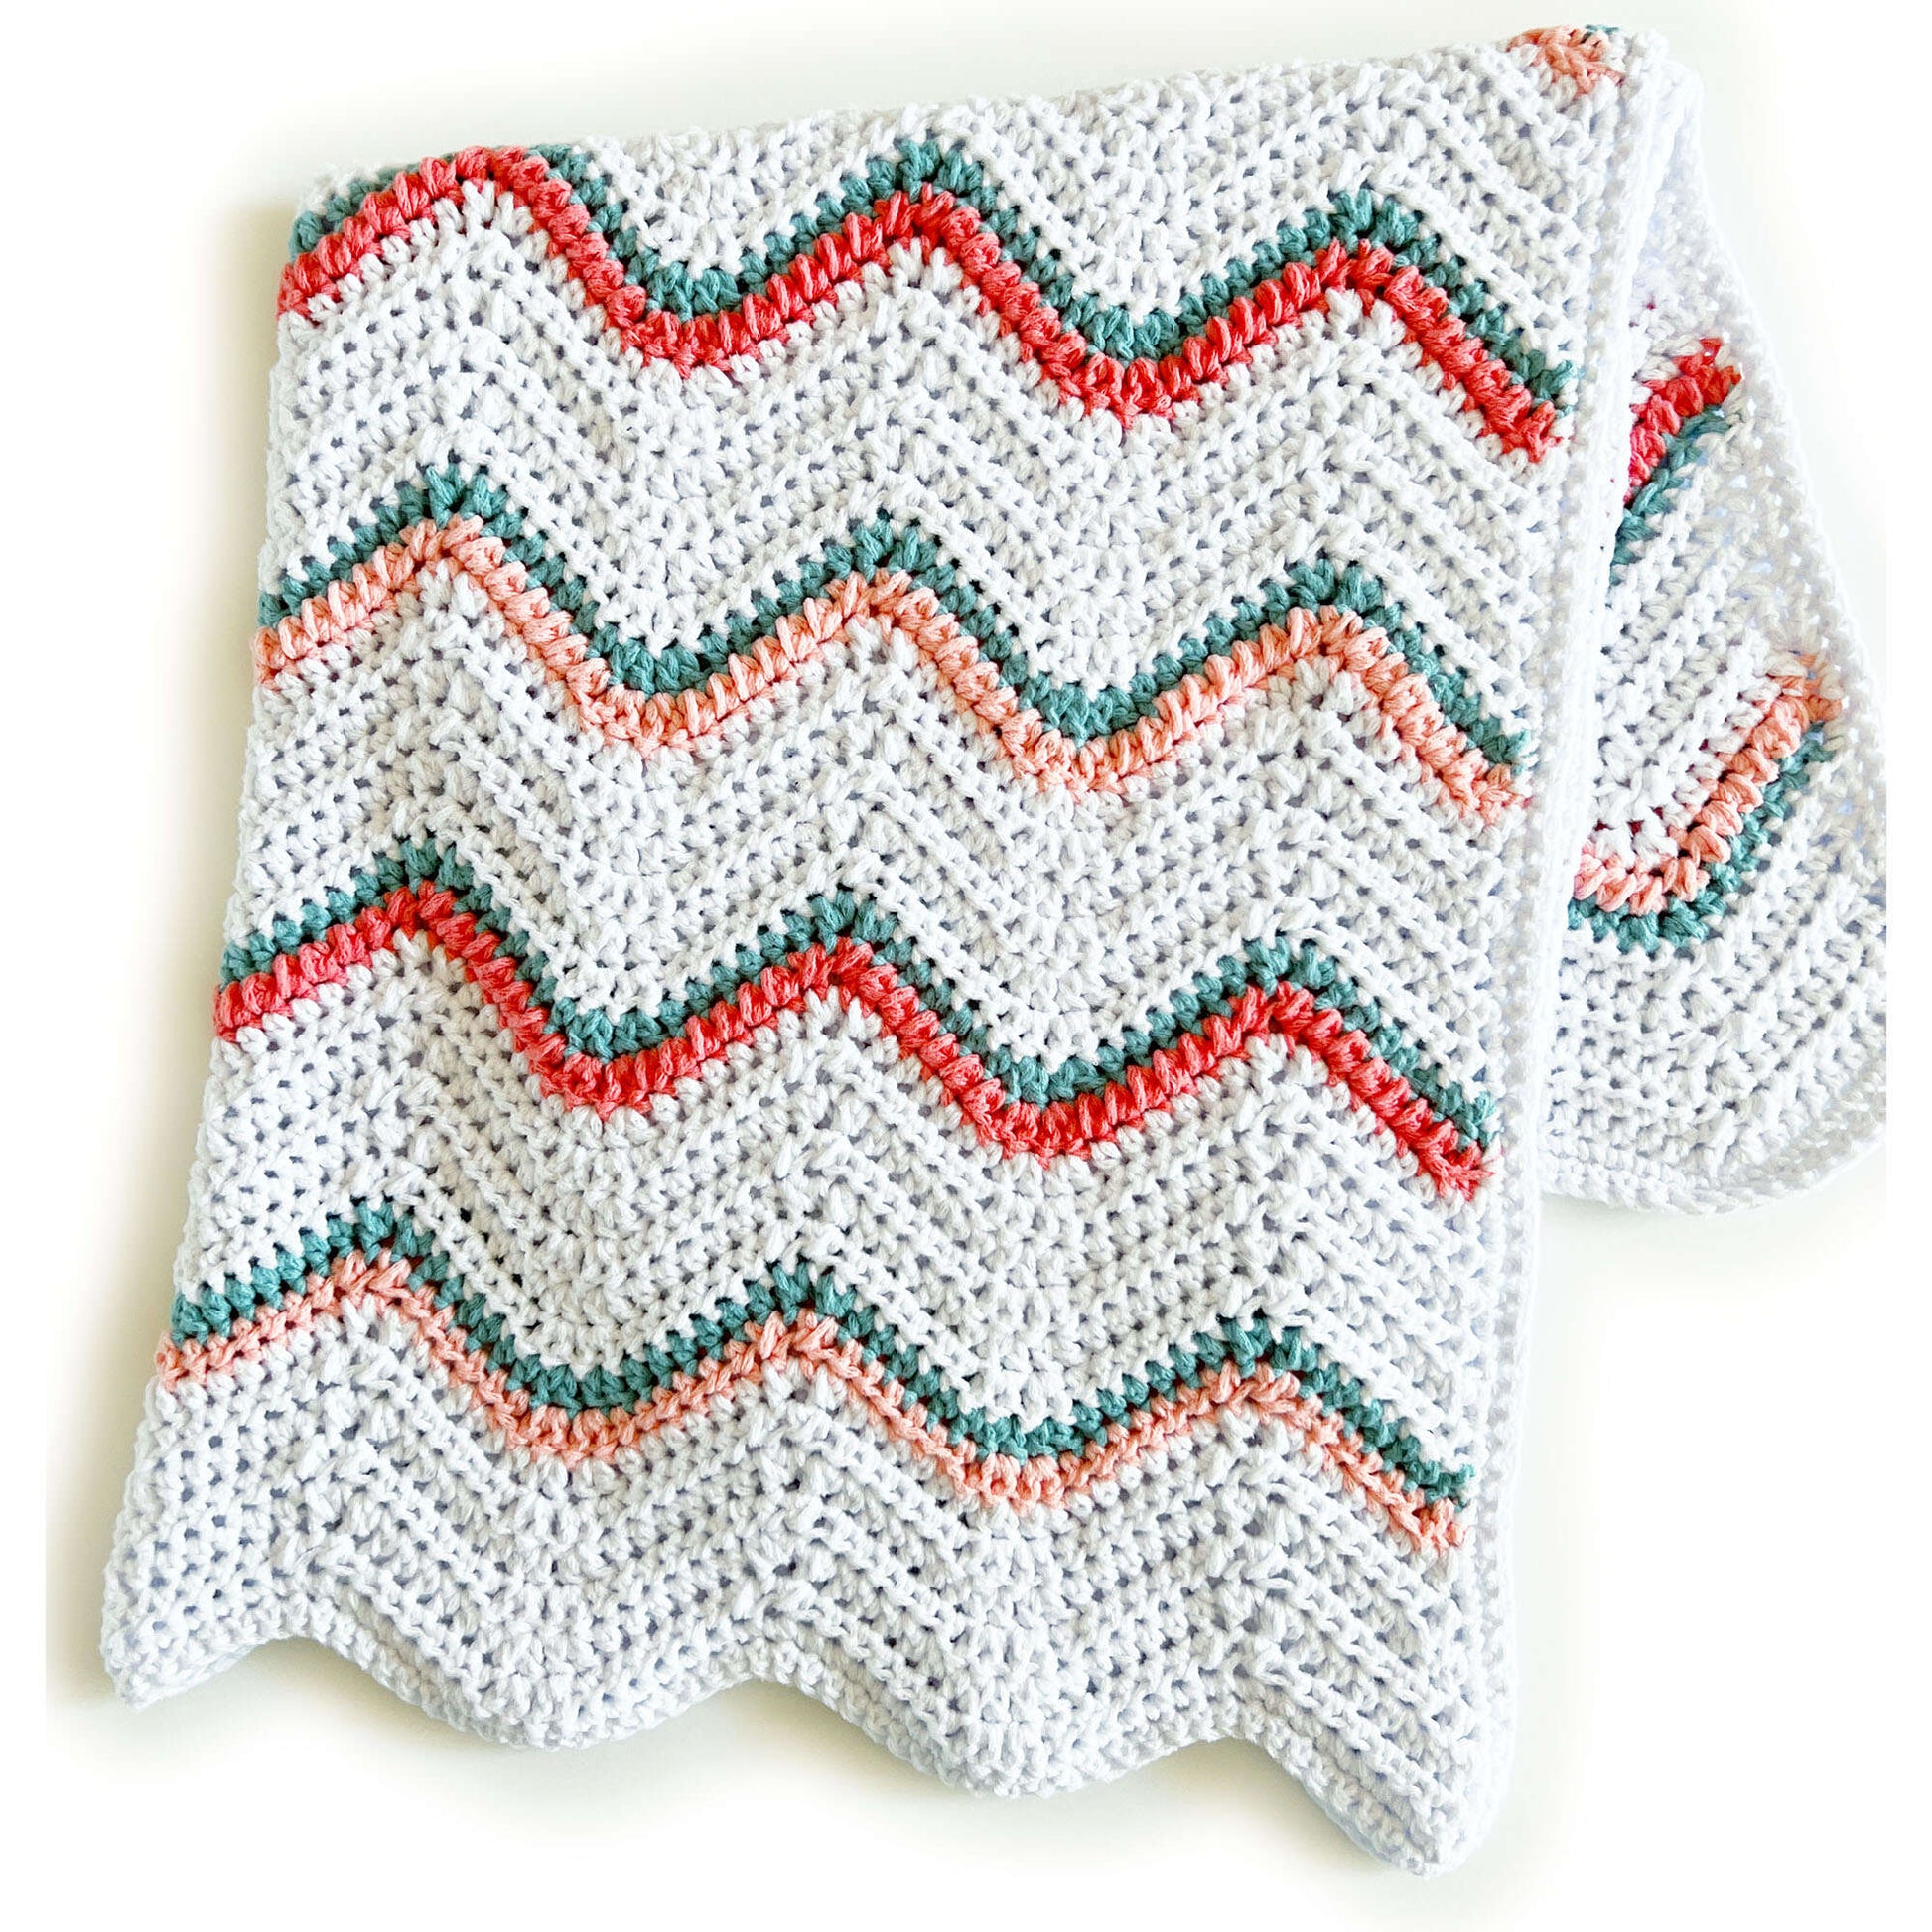 12 Blanket Yarn Patterns - Made with a Twist